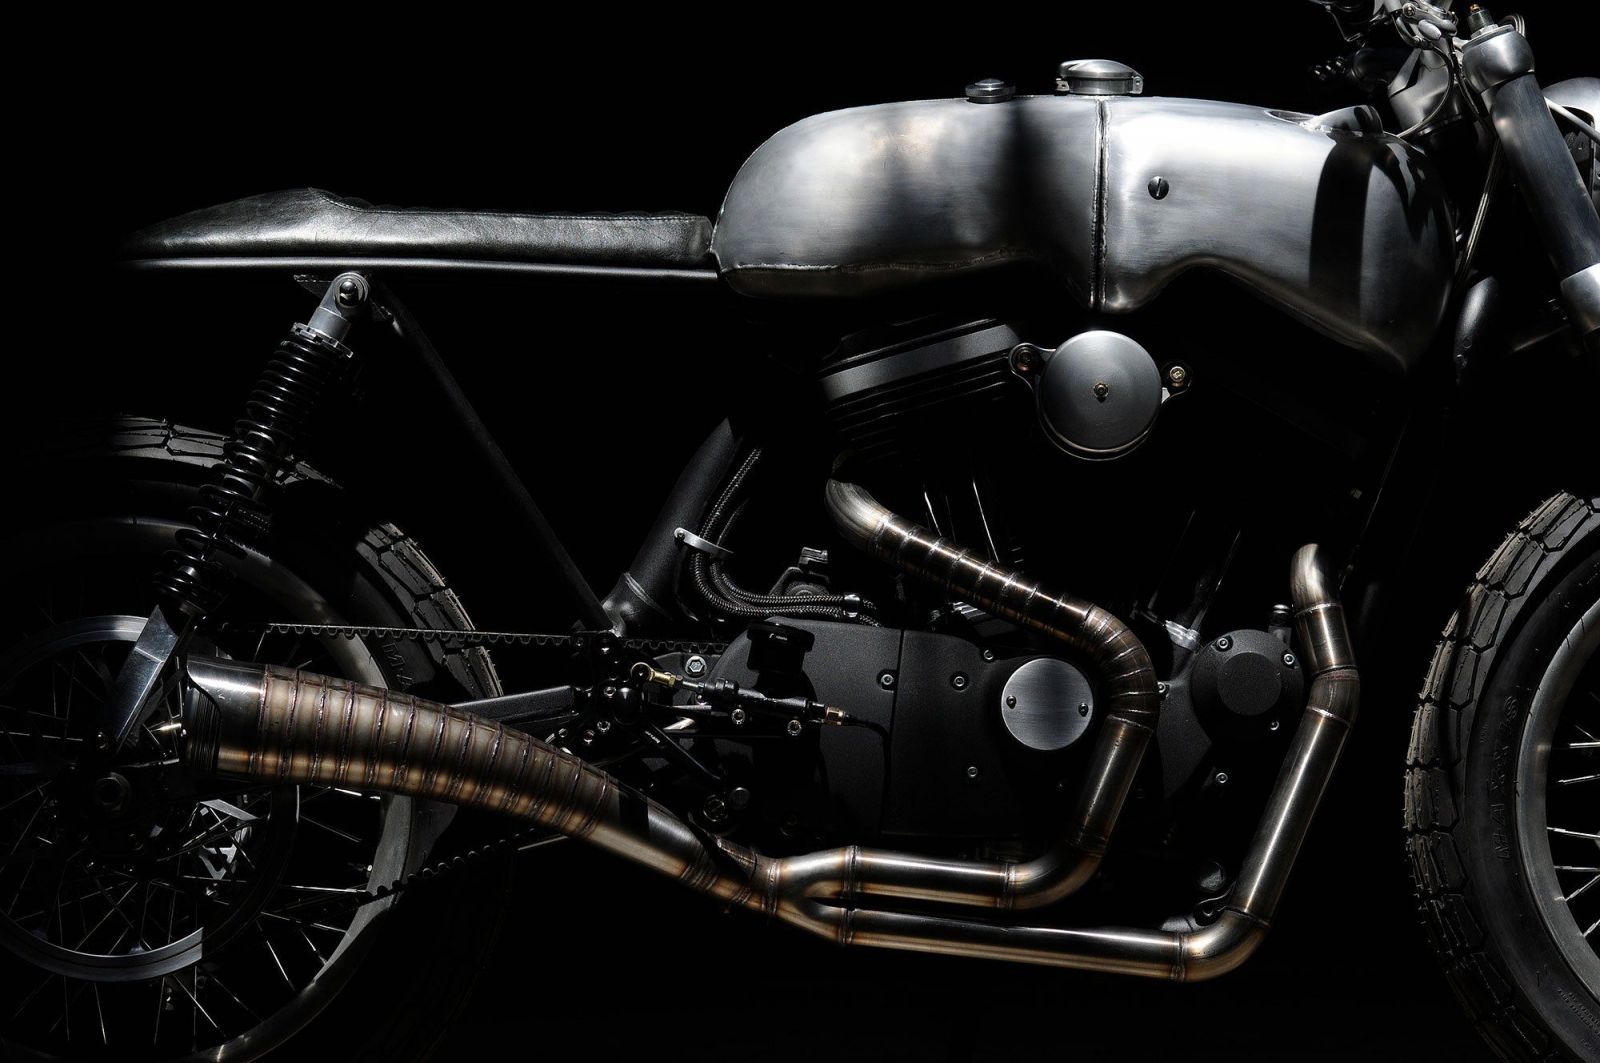 The Hardley custom Harley-Davidson by Revival Cycles exhaust